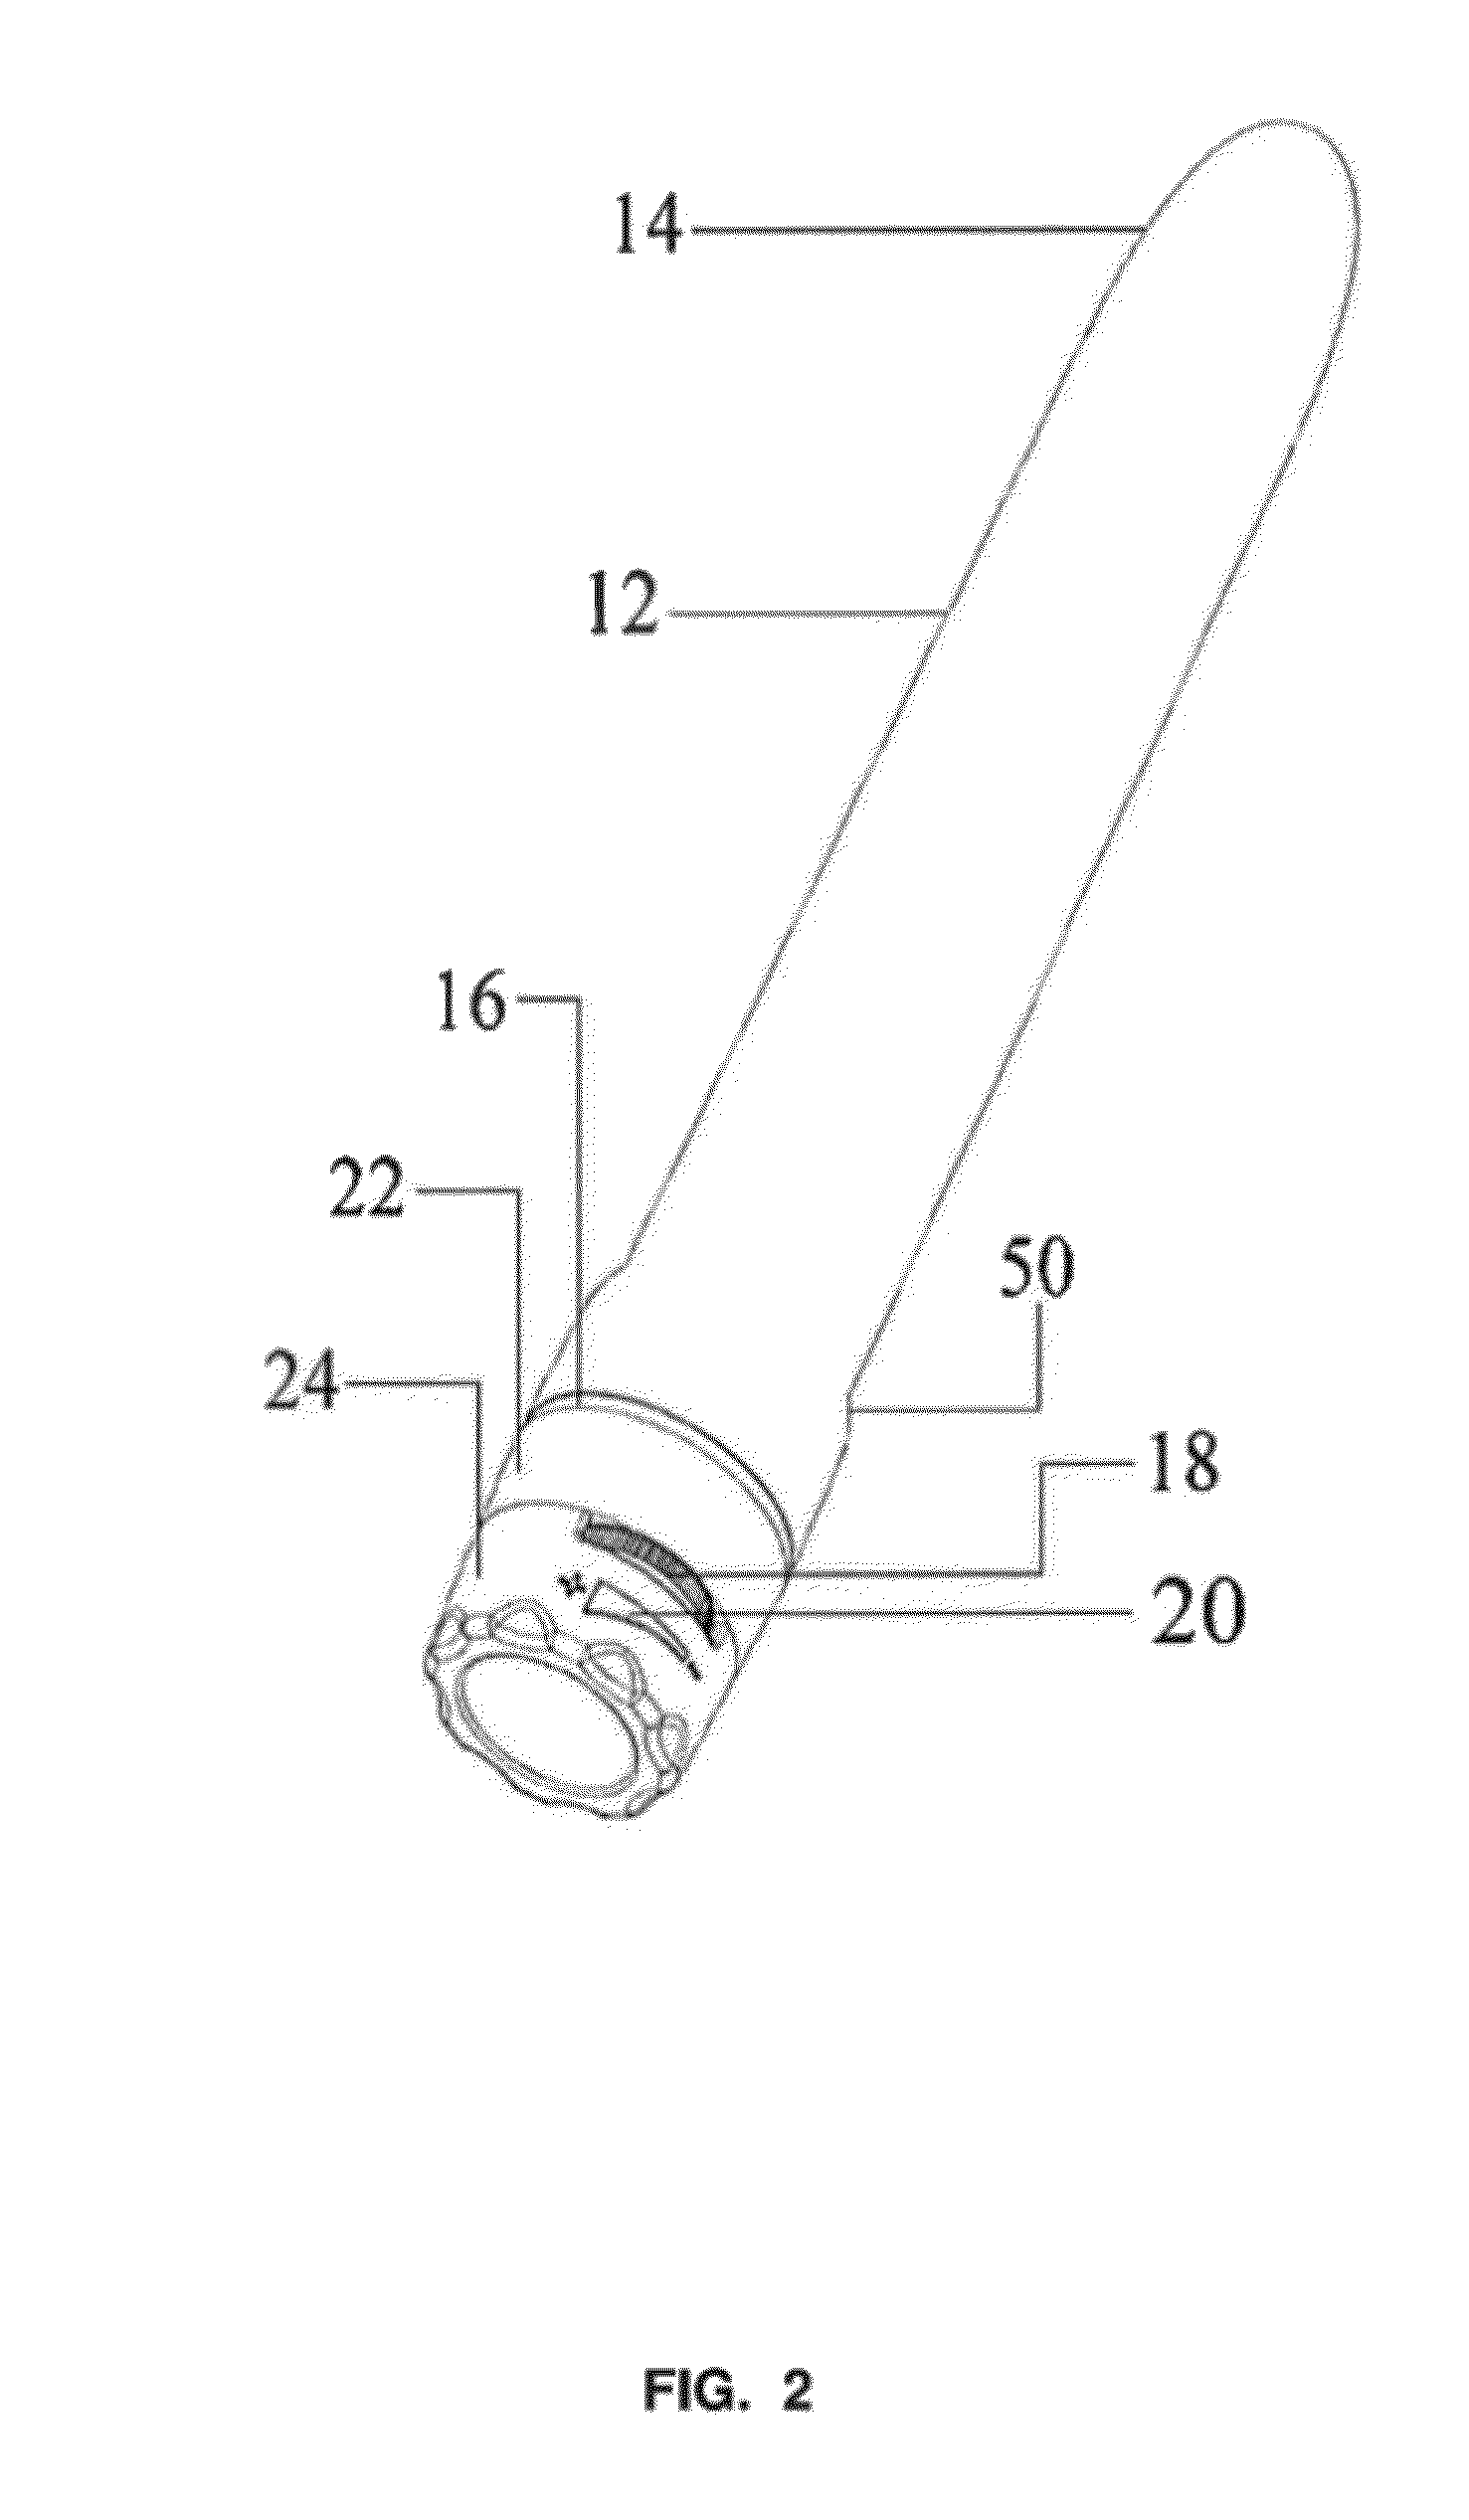 Vaginal tissue regeneration device and method for regeneration of vaginal lining using vibration therapy